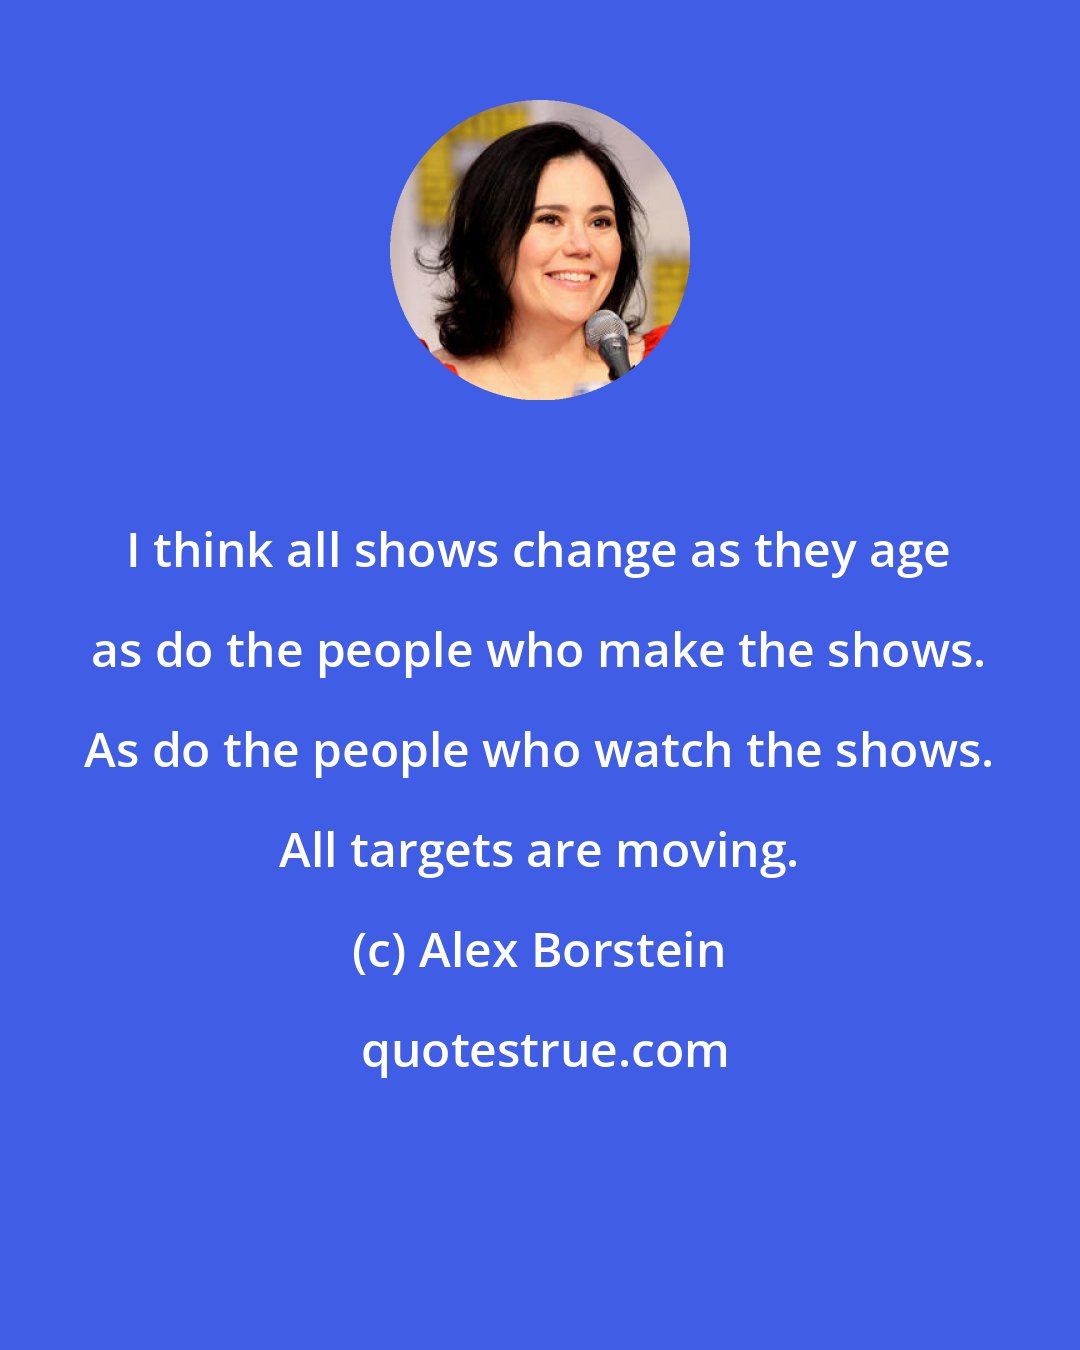 Alex Borstein: I think all shows change as they age as do the people who make the shows. As do the people who watch the shows. All targets are moving.